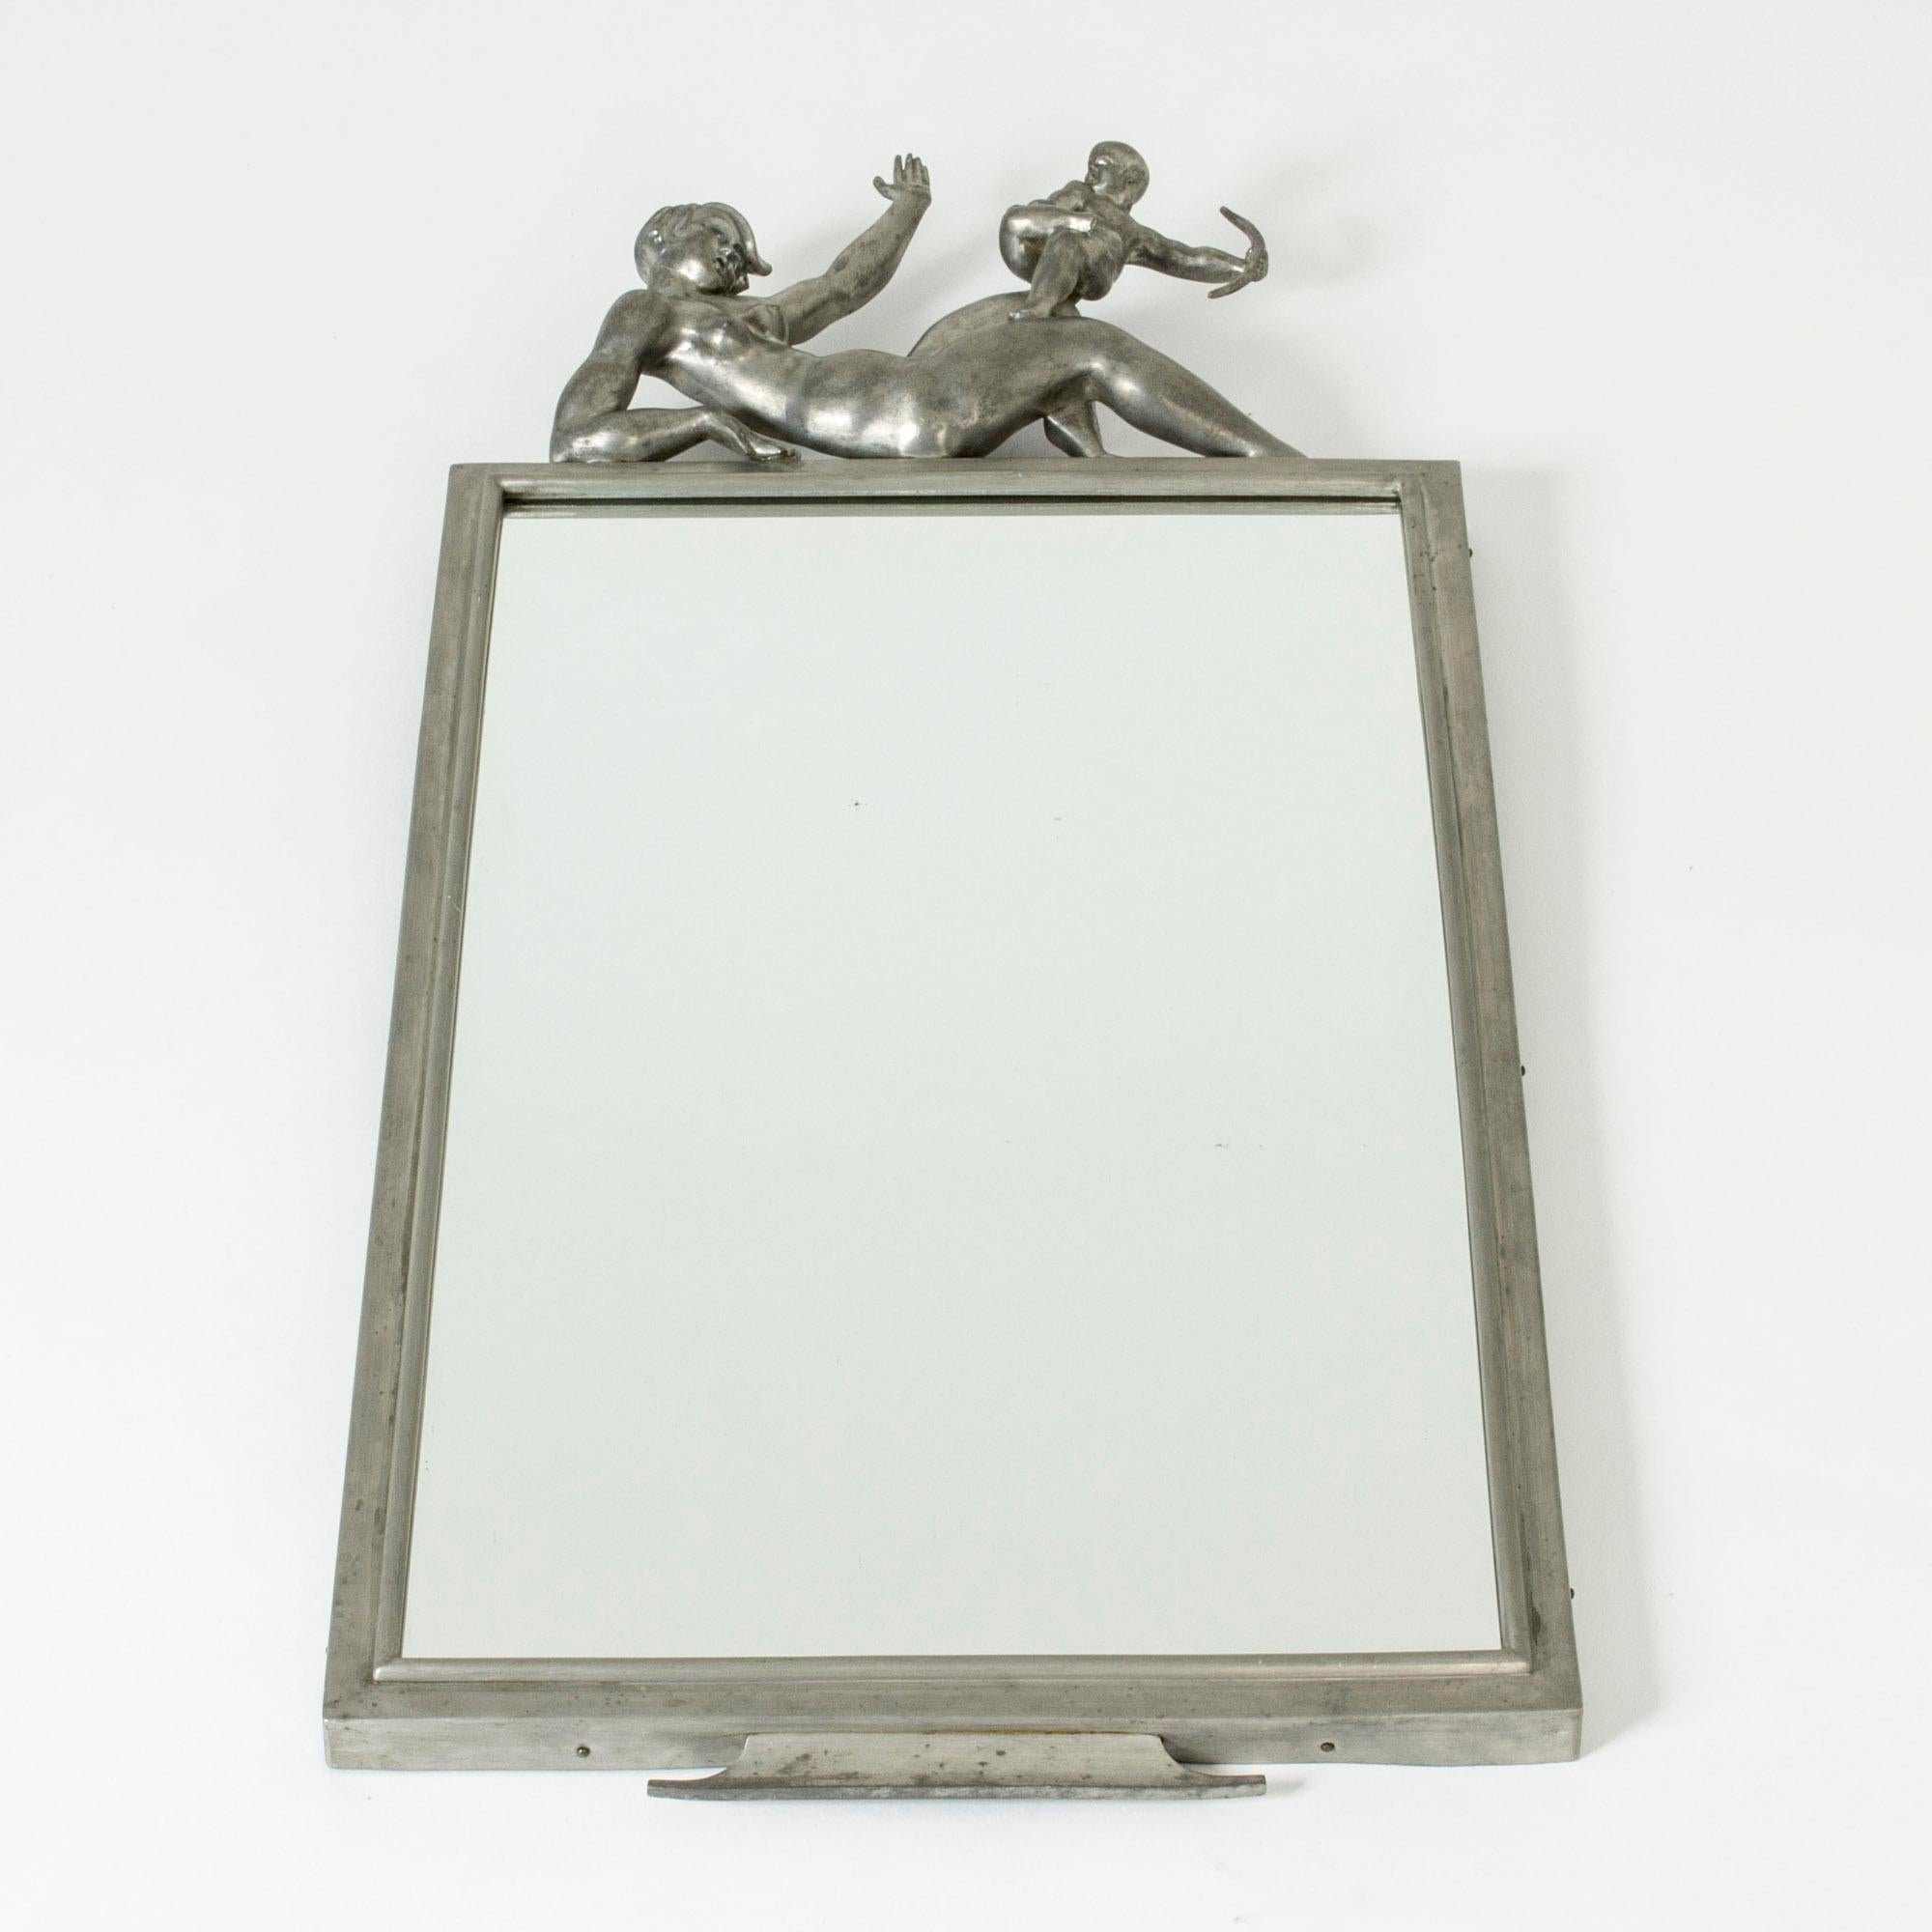 Stunning wall mirror by Thorwald Alef, made in pewter. The design is called “Amors spratt” (“Cupid’s Trick”). The top is adorned with a reclining woman with a naughty-looking Cupid on her knee, who she is trying to fend off. Beautifully sculpted.